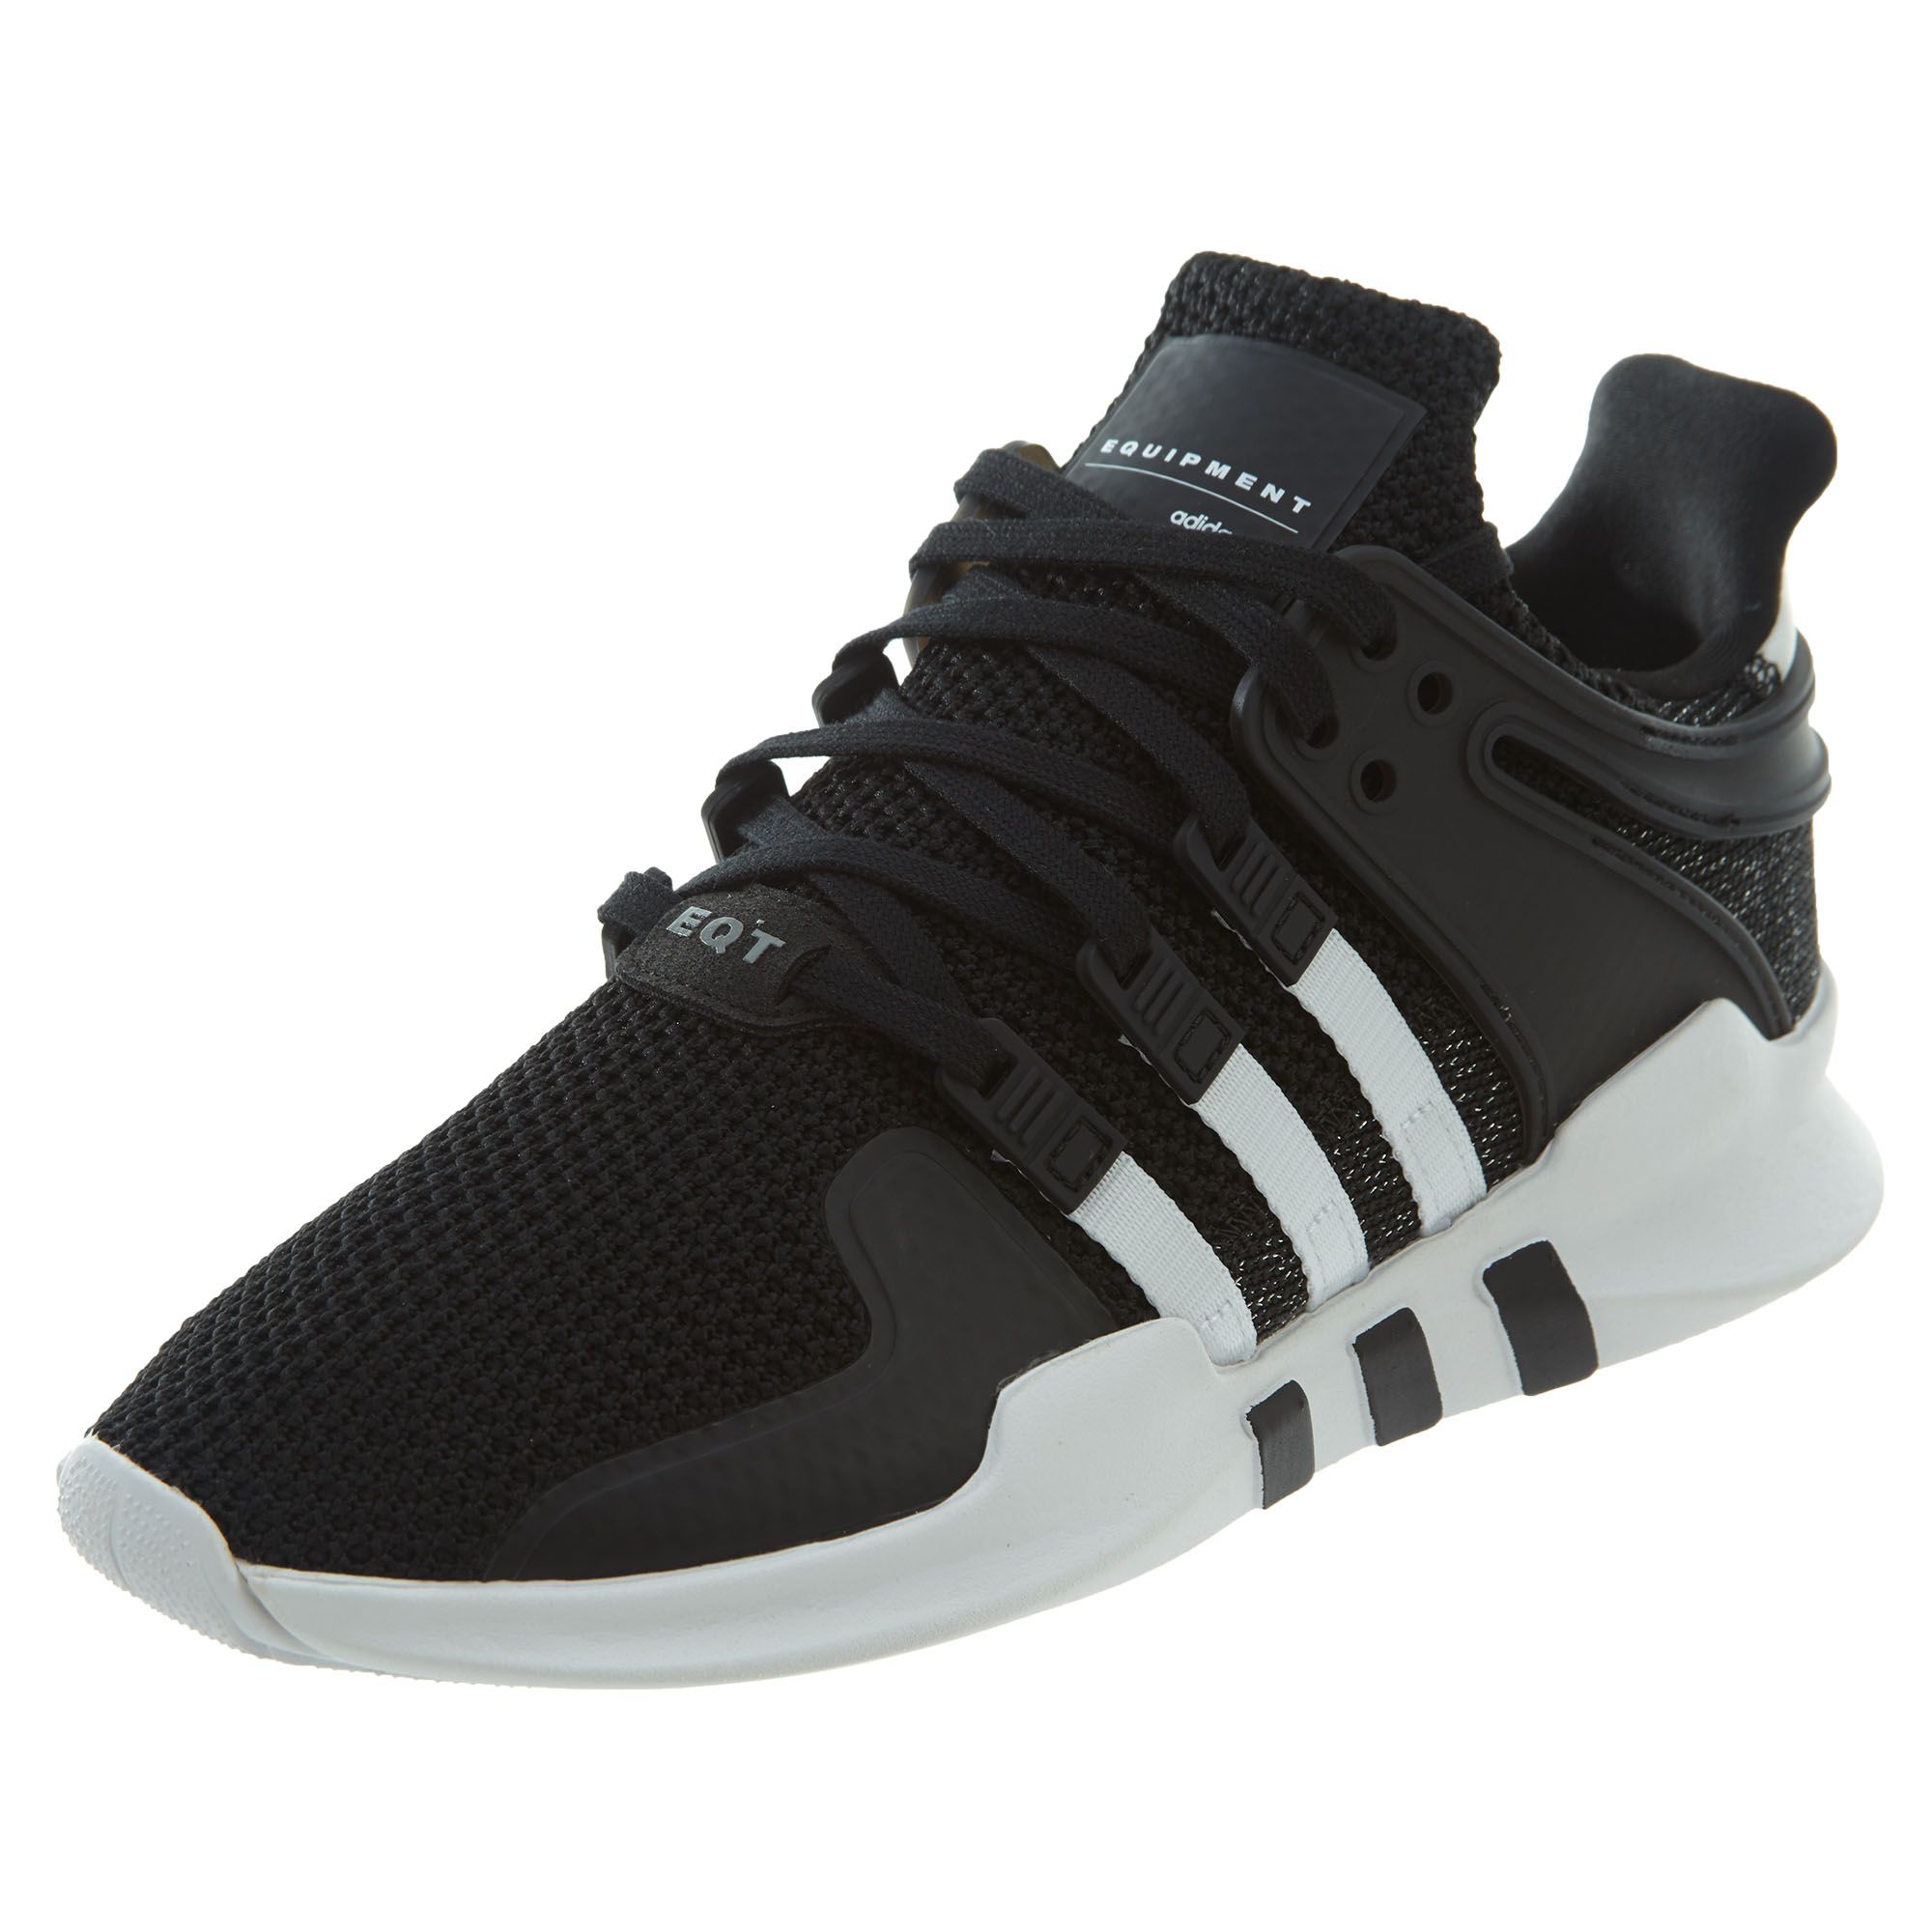 Adidas Eqt Support Adv Womens Style 